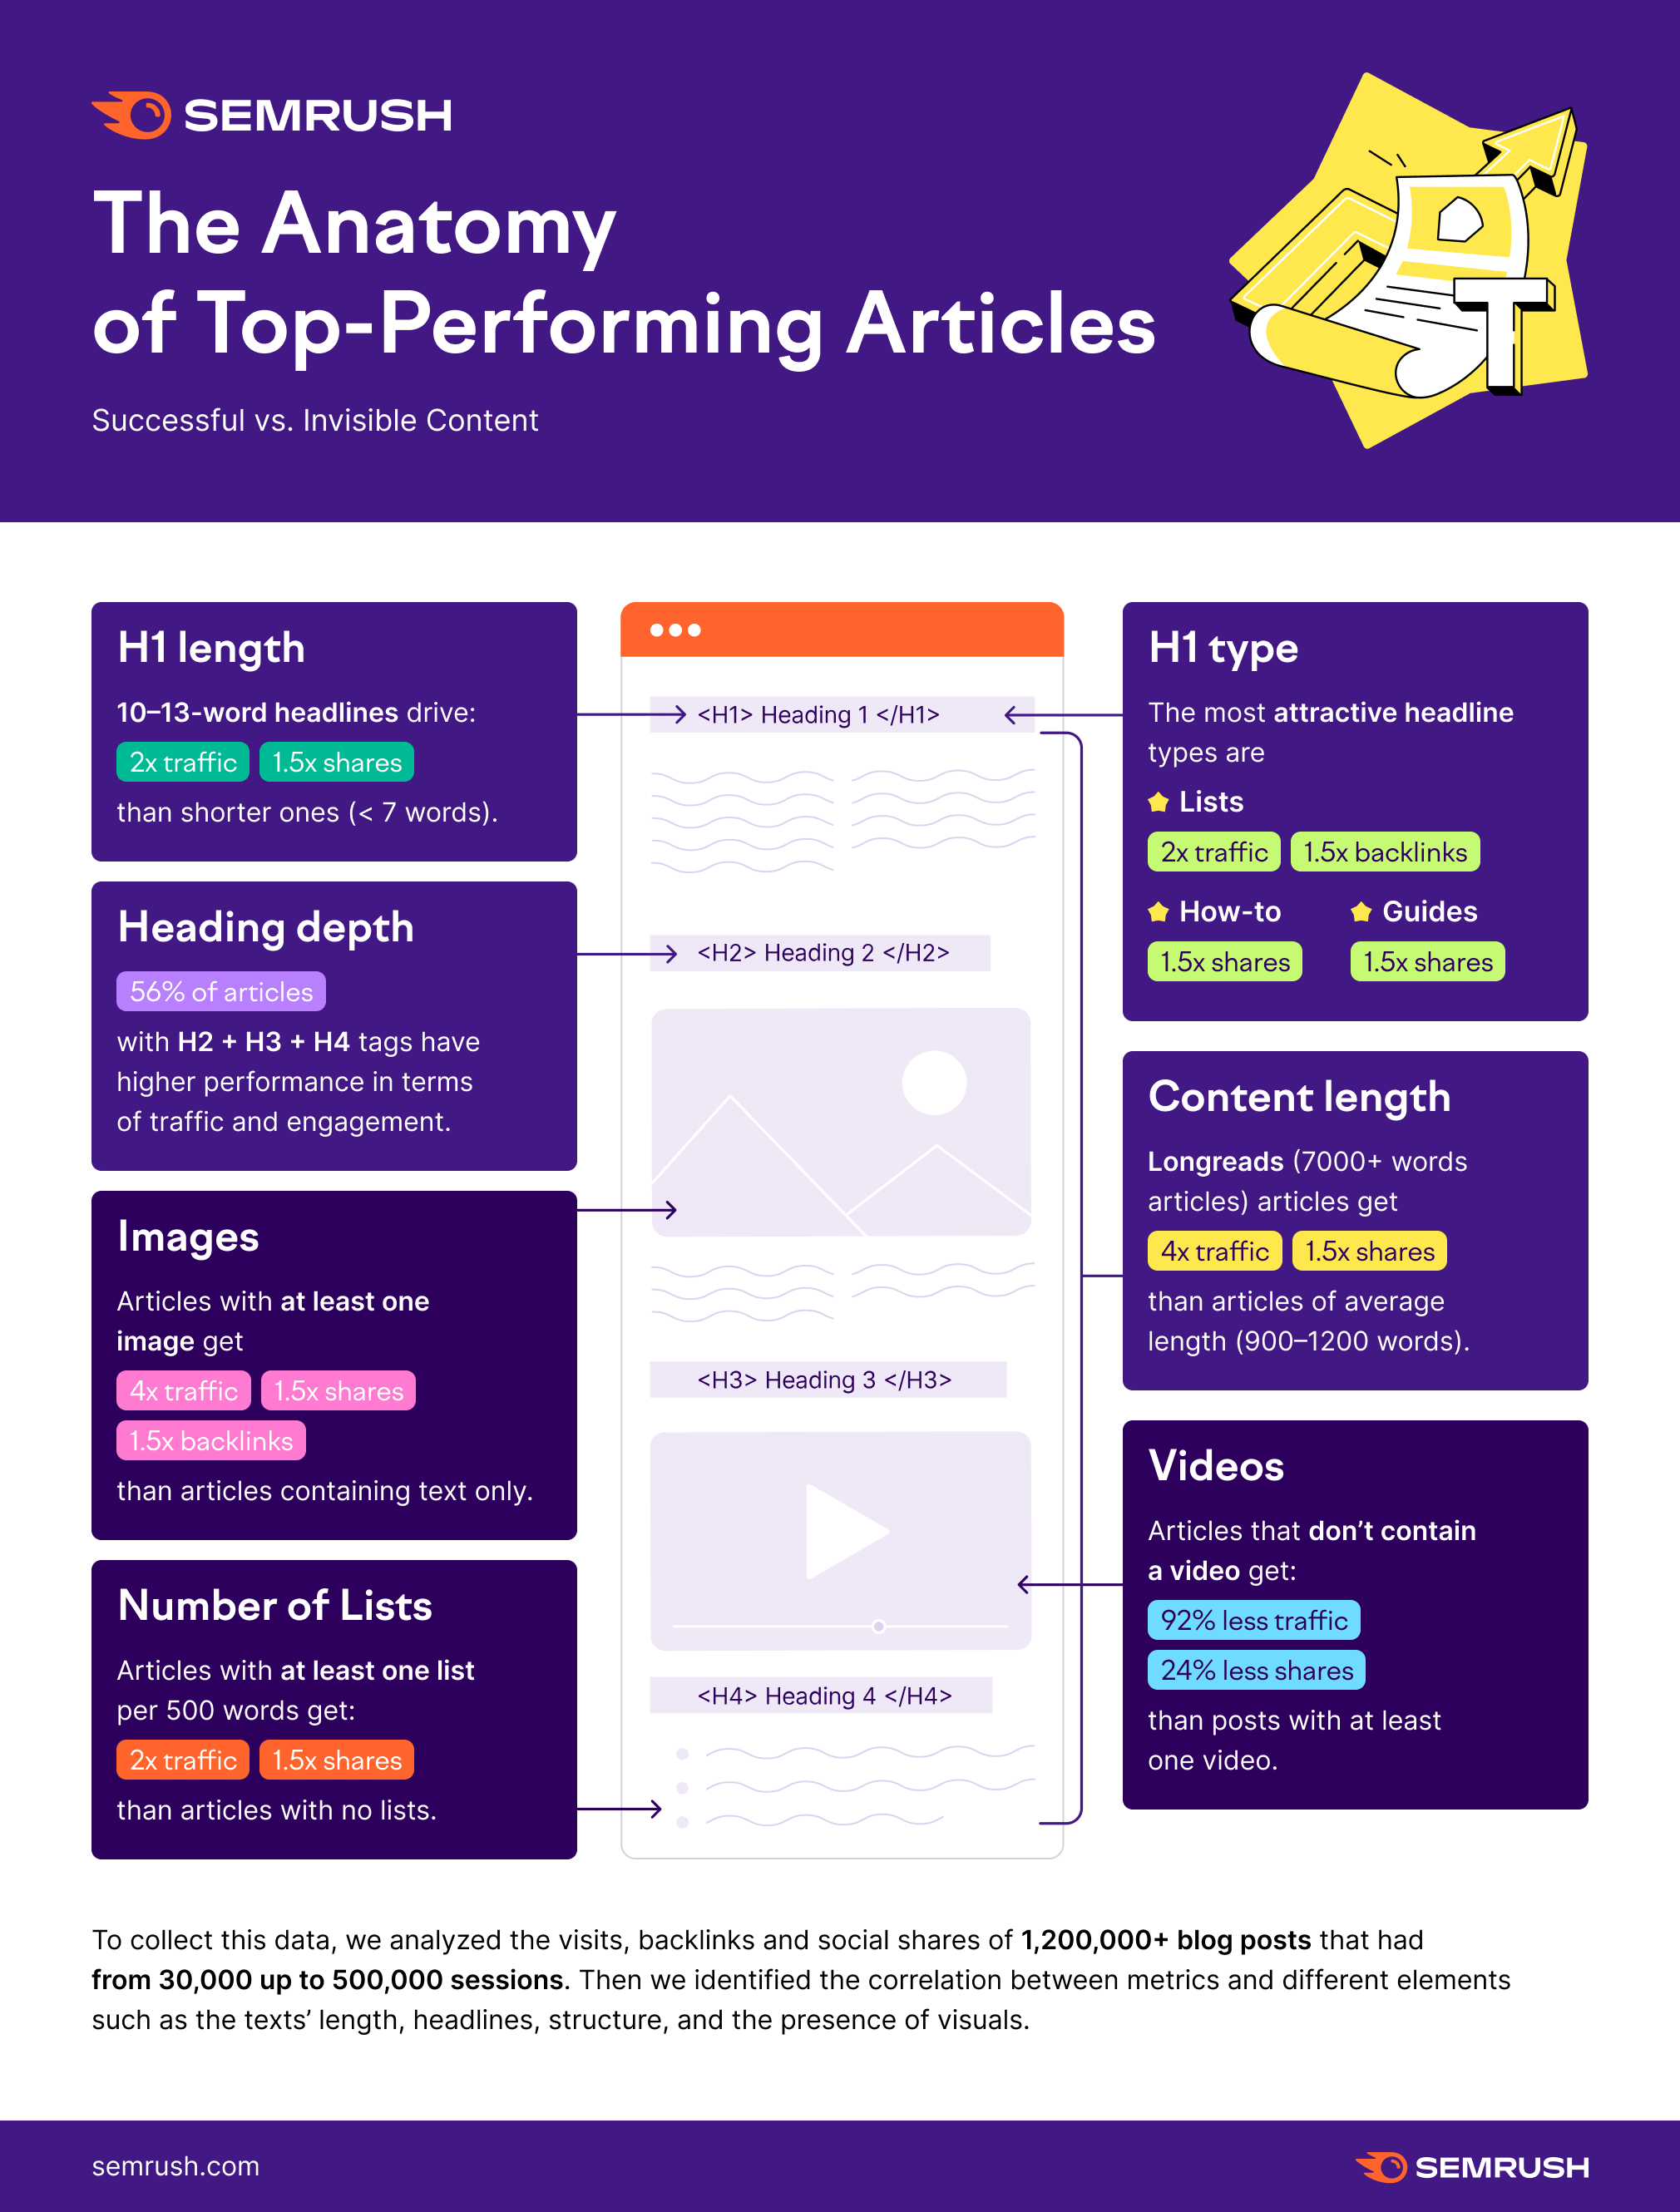 The Anatomy of a Share-Worthy Article